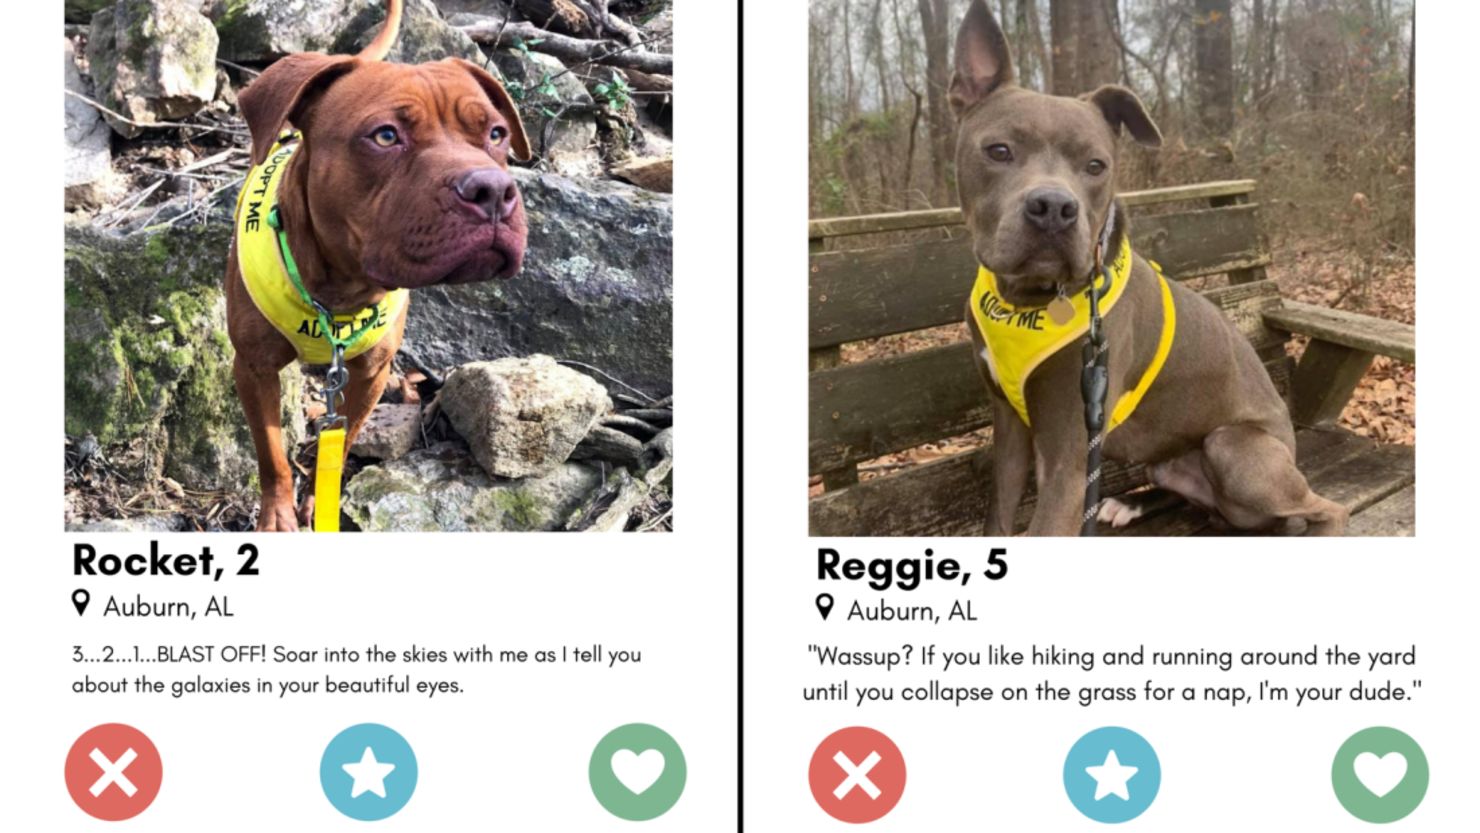 The Alabama animal shelter created profiles for the animals similar to those found on dating apps.